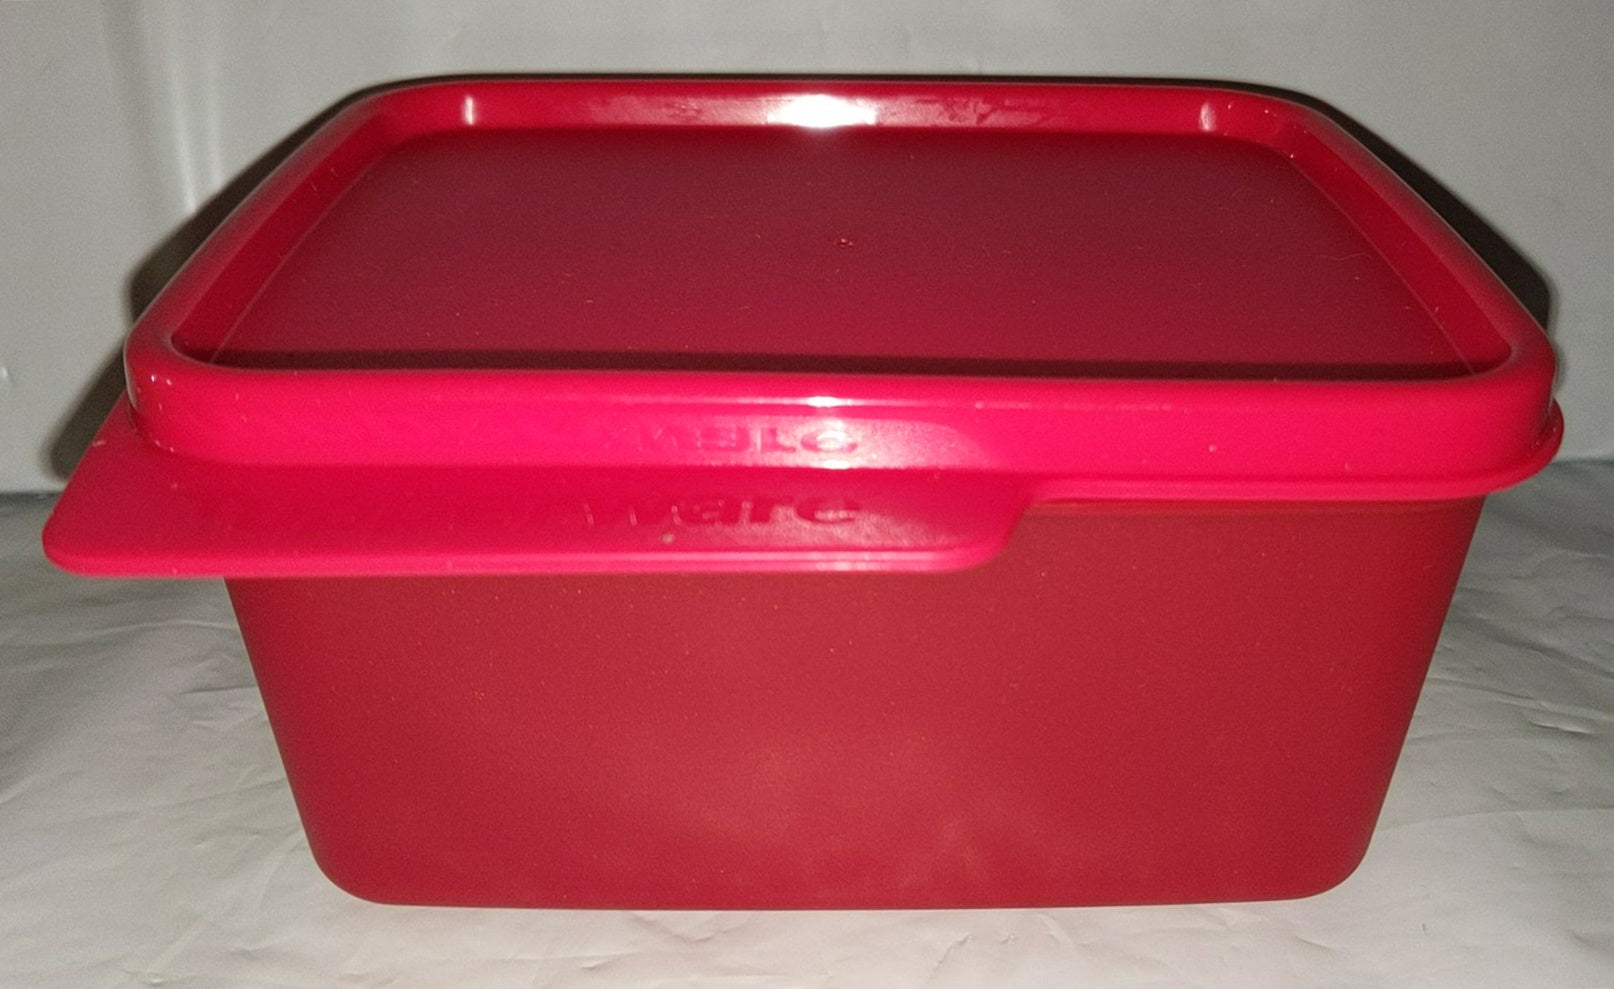 TUPPERWARE 1 SMALL 2-cup KEEP TABS STORAGE KEEPER CONTAINER BRIGHT RED